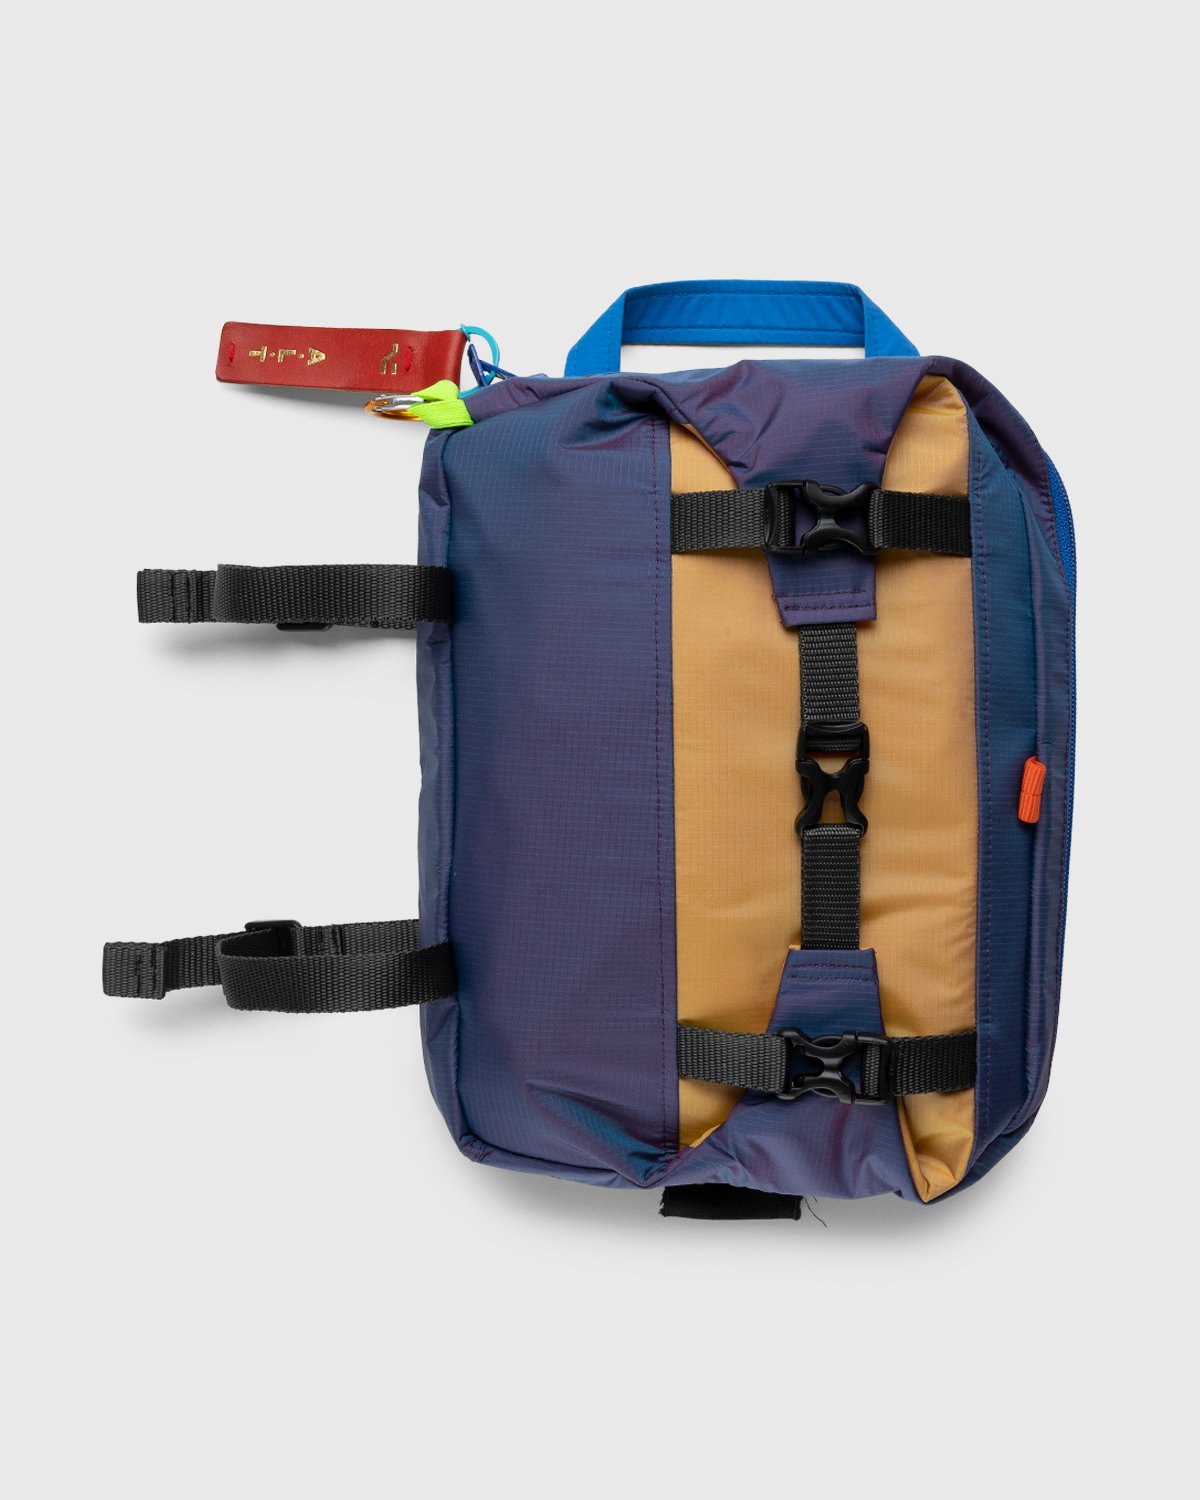 KARMA8A x Highsnobiety - HS Sports Alt Backpack Gold - Accessories - Gold - Image 2